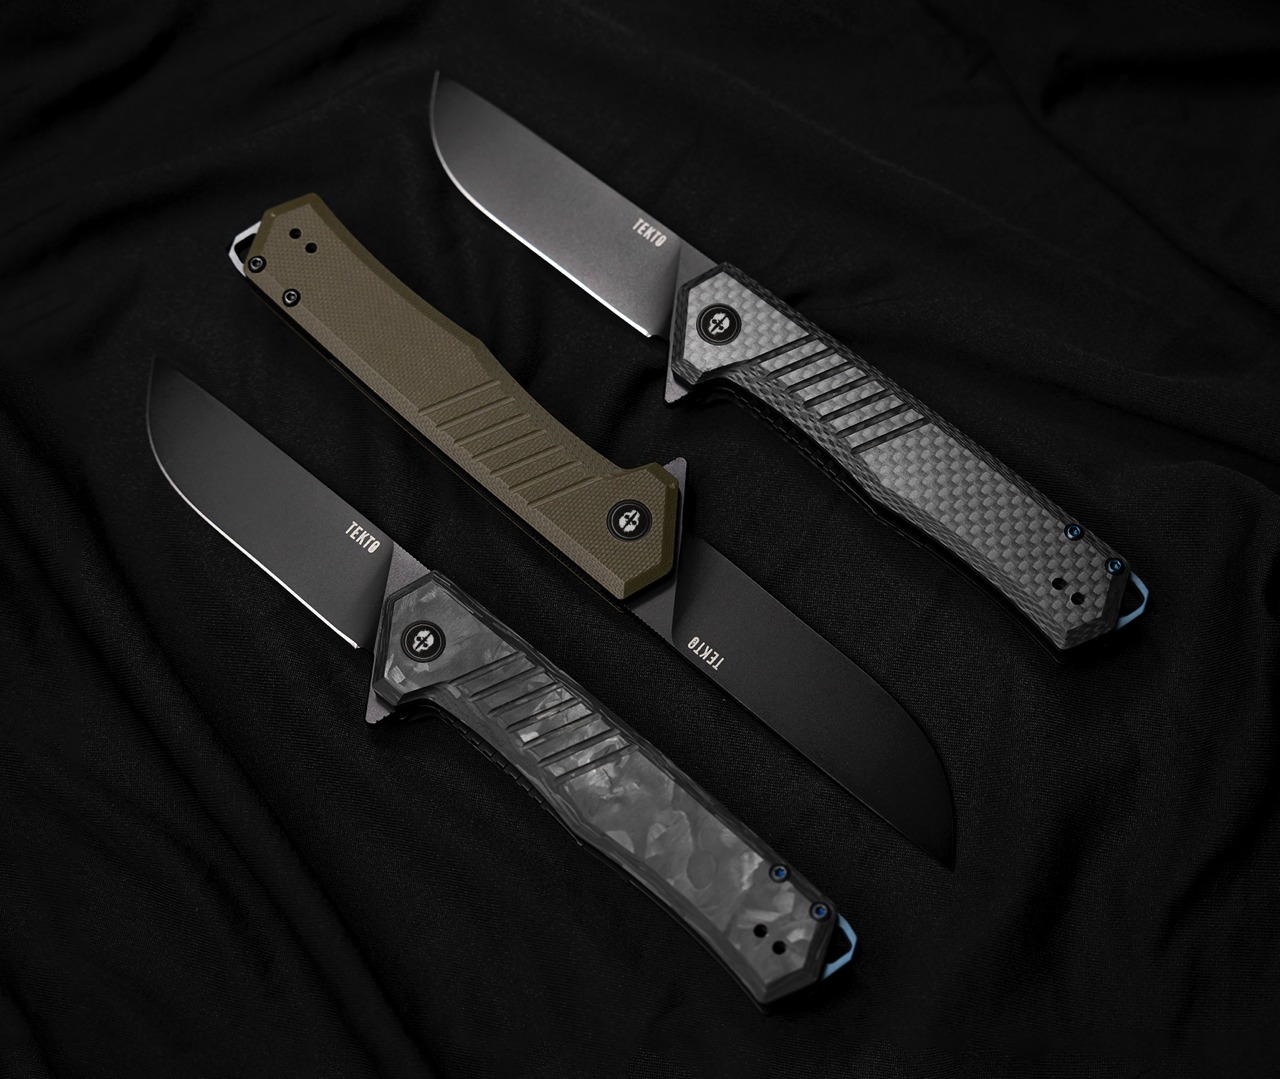 Tekto’s latest EDC must-have is a slick titanium-plated pocket knife with a built-in glass breaker